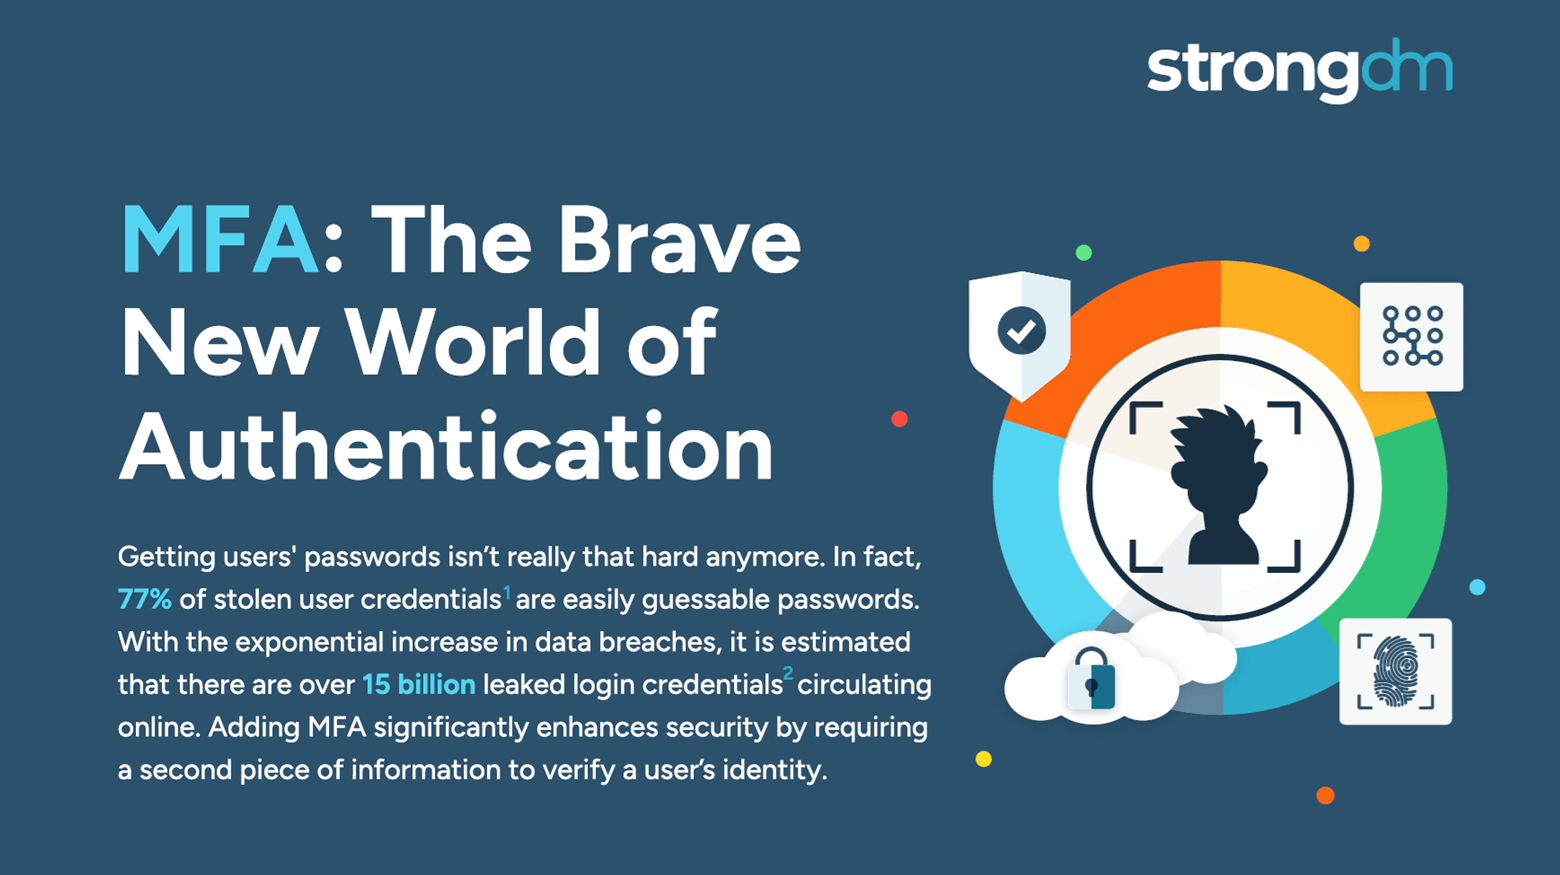 MFA: The Brave New World of Authentication (Infographic)